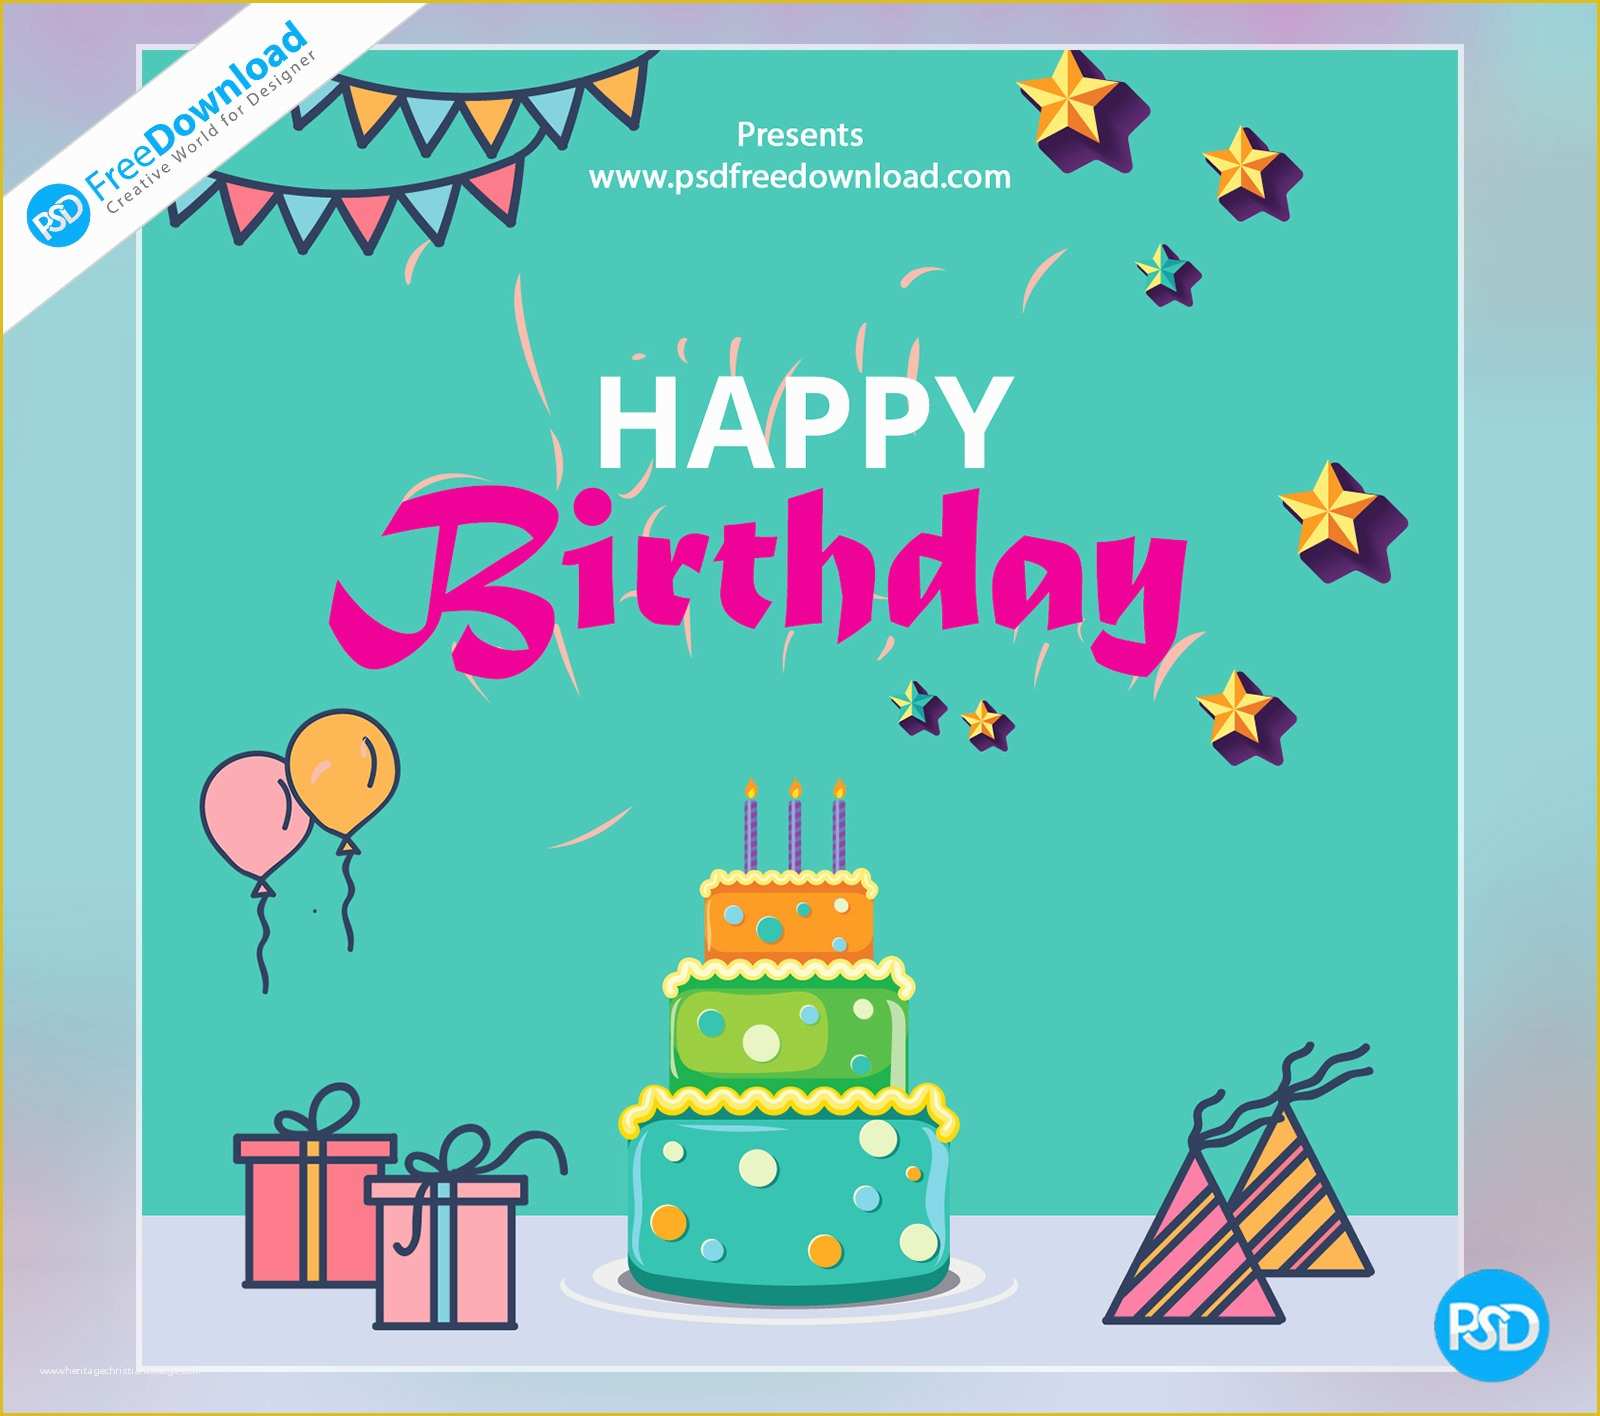 Birthday Wishes Templates Free Download Of Happy Birthday Template Greeting Card Psd Free Download